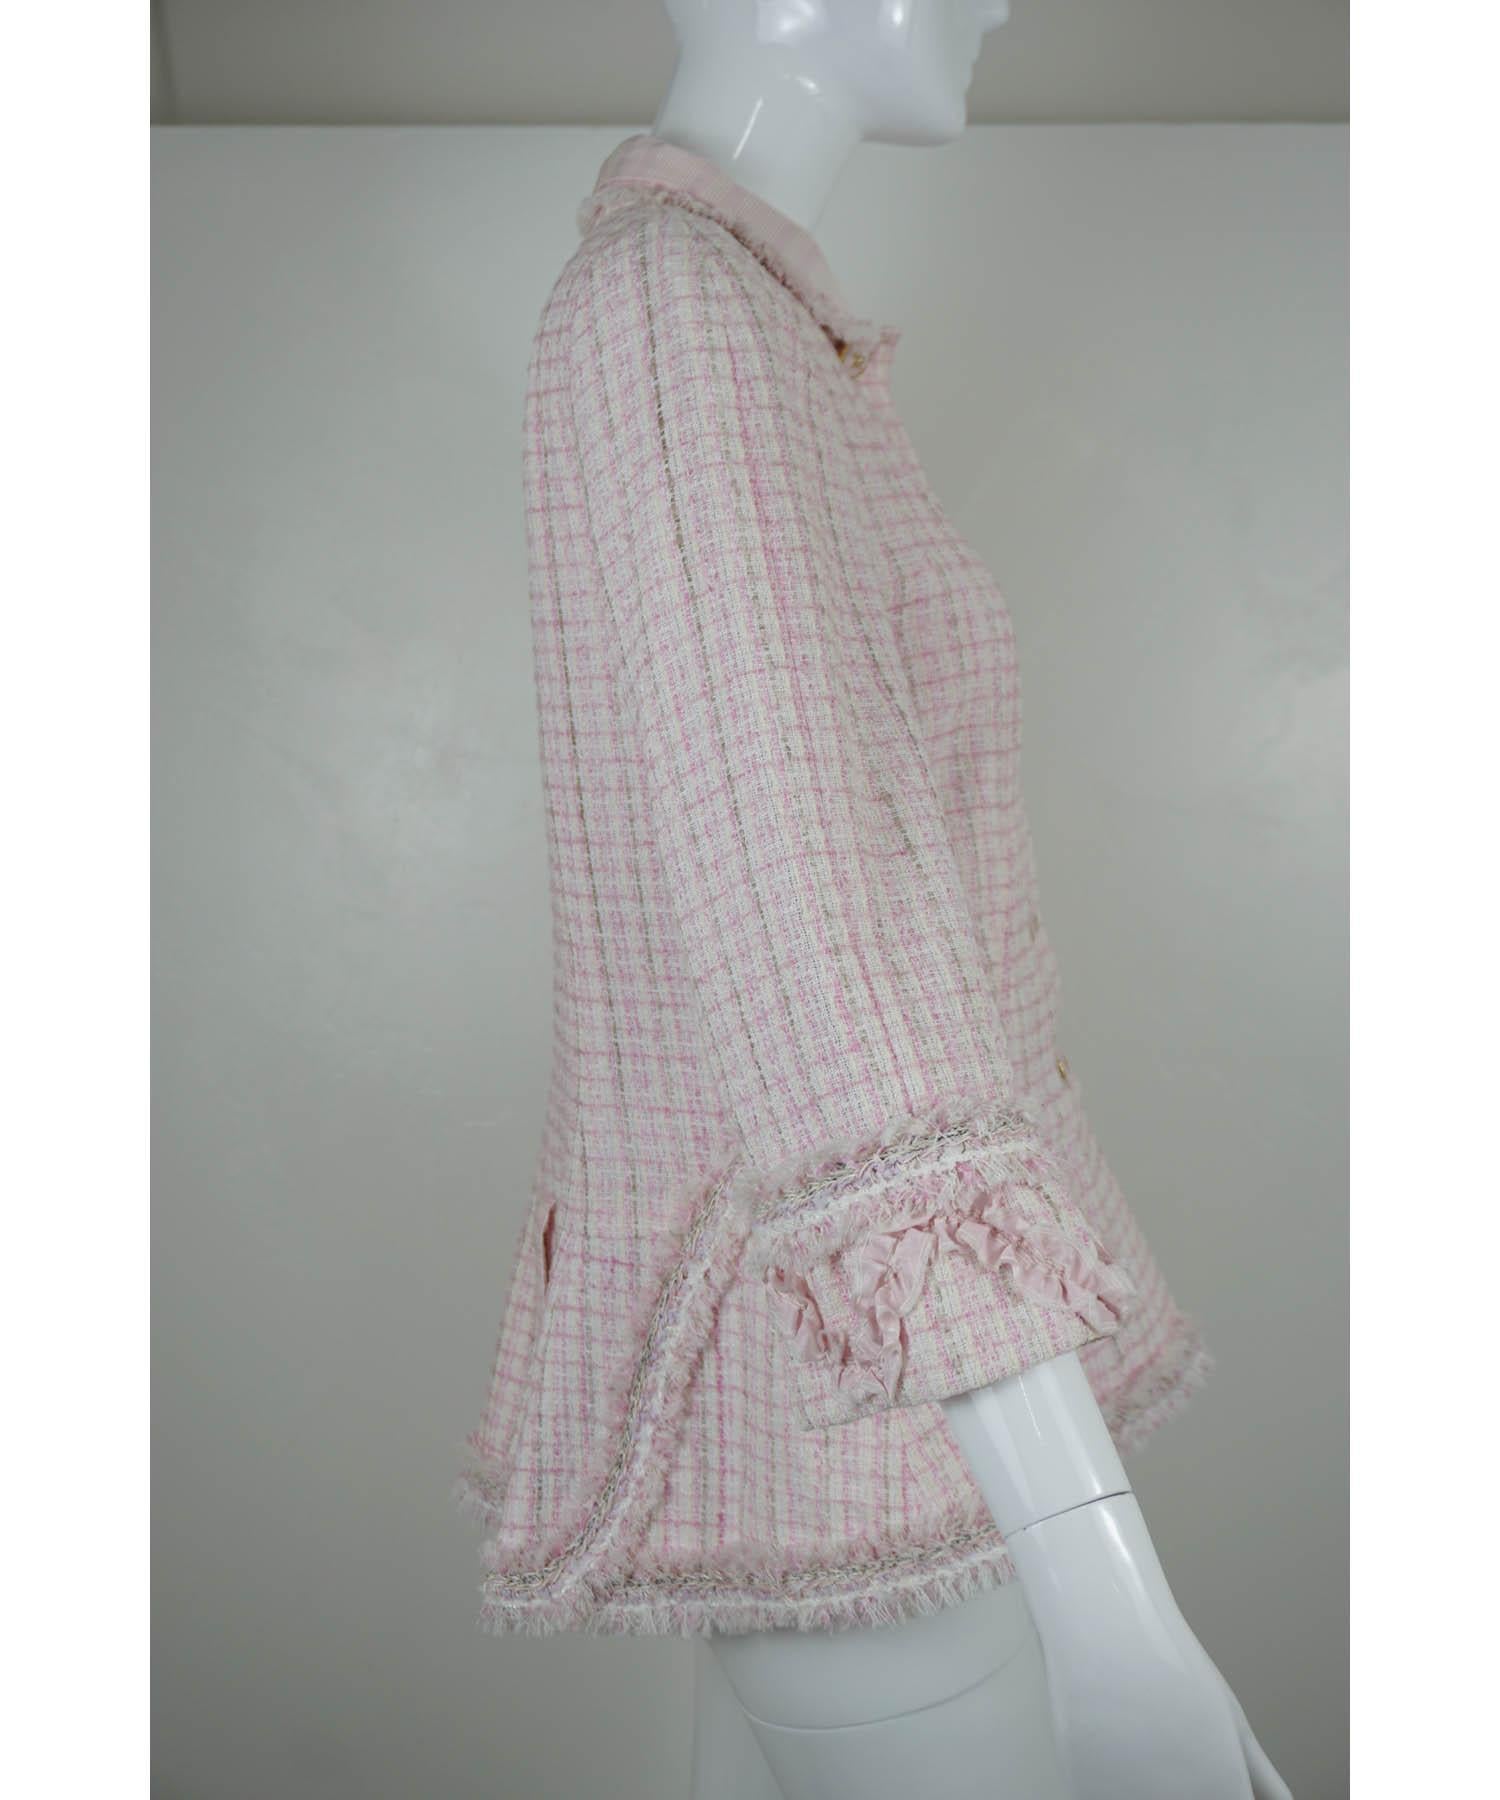 Chanel Plaid Tweed Jacket Ribbon Fringe Trim 2013C In Excellent Condition For Sale In Carmel, CA